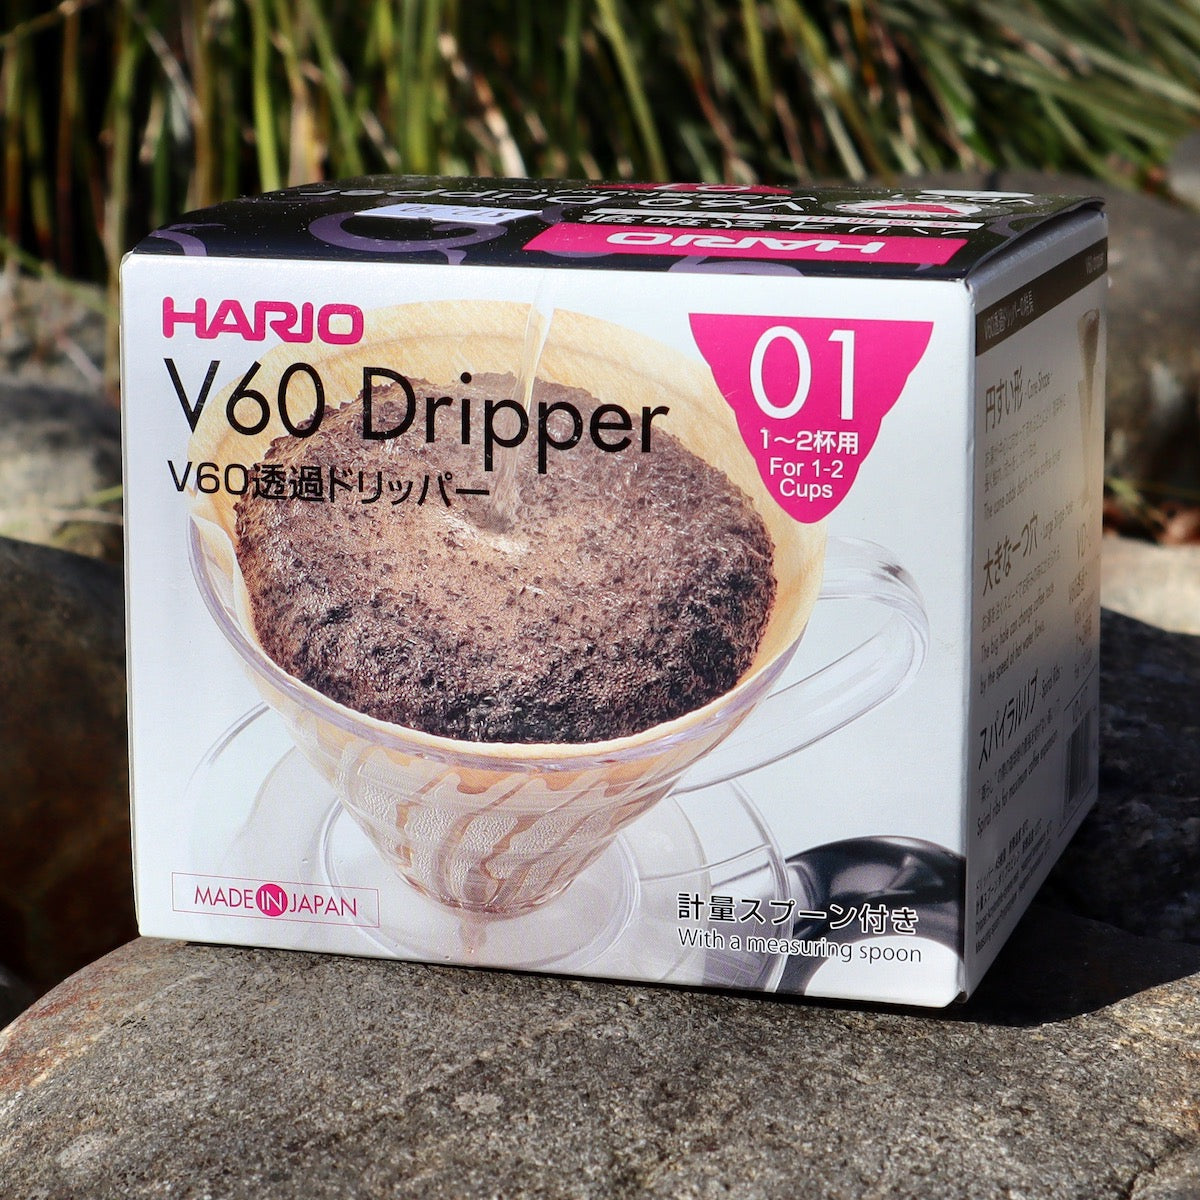 Hario V60 01 Dripper Coffee Filters from The Town Roaster